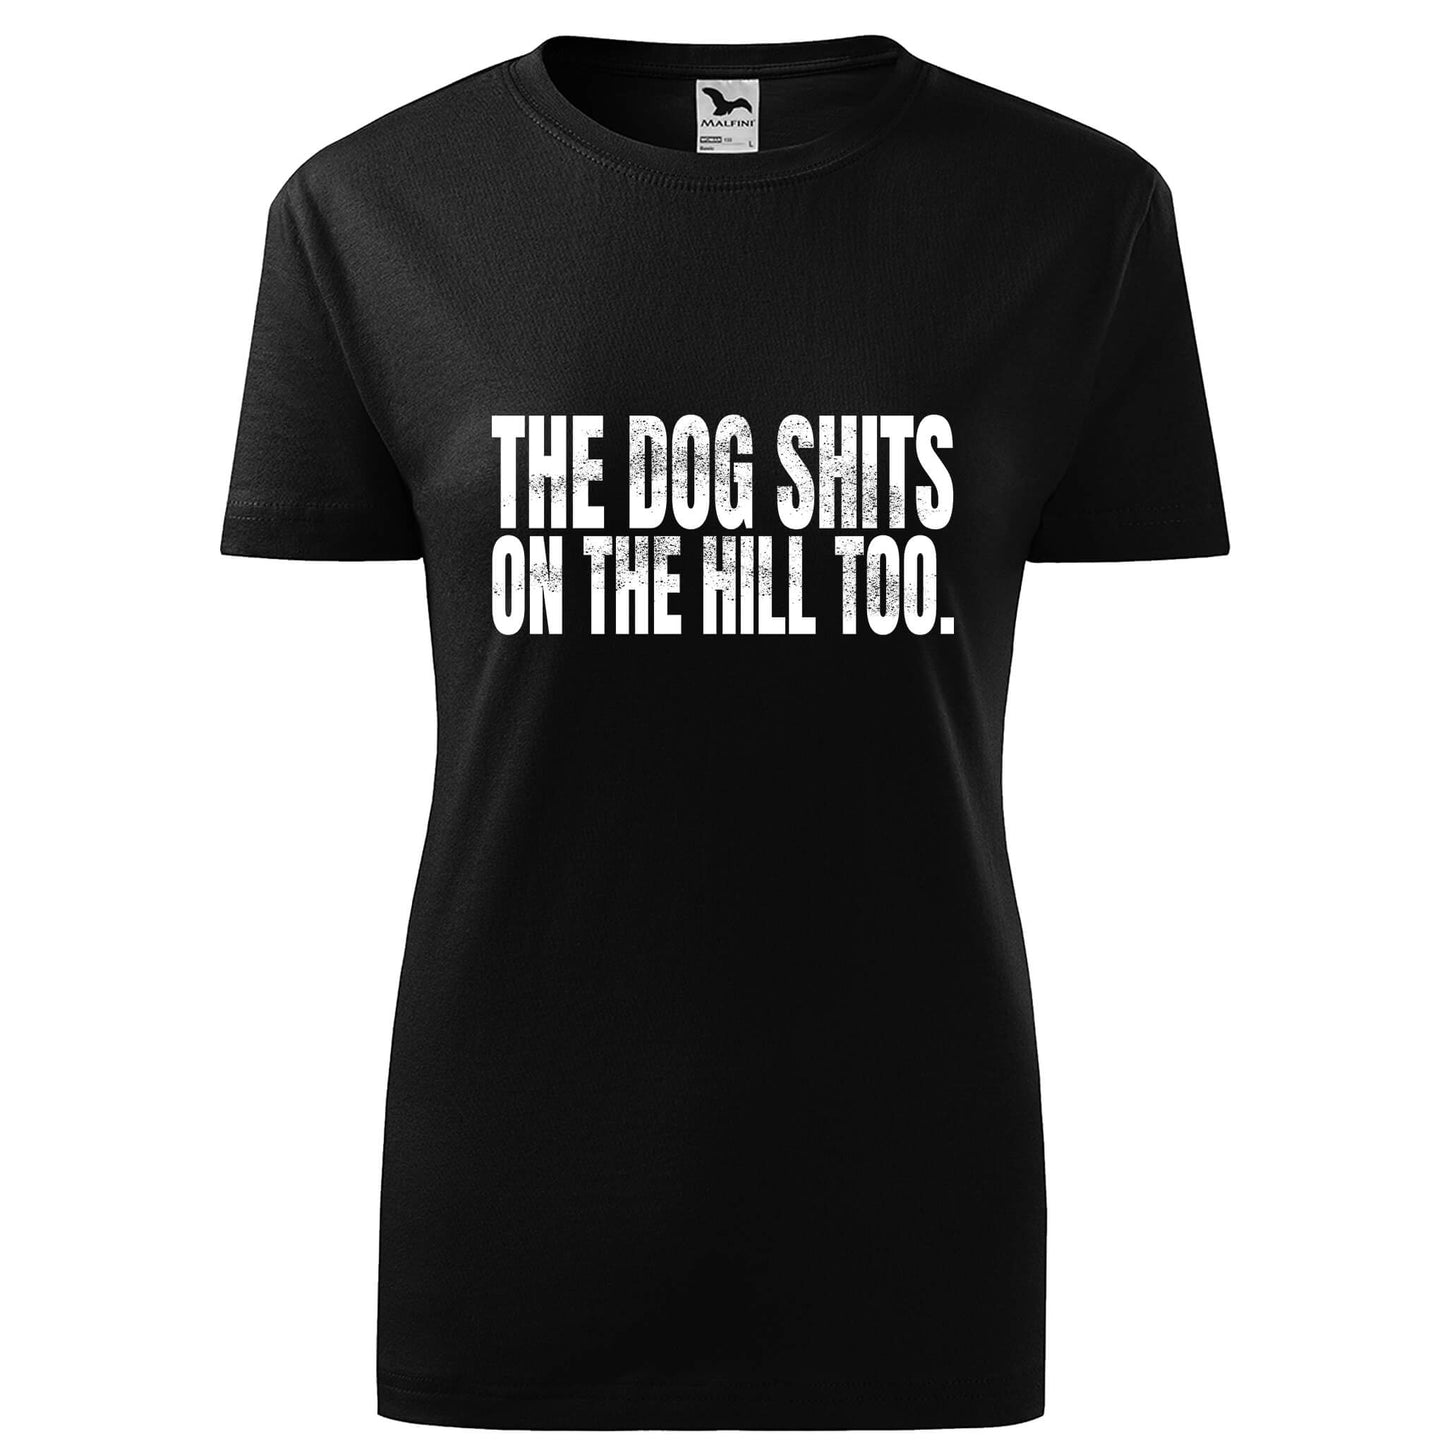 The dog shits on the hill too t-shirt - rvdesignprint